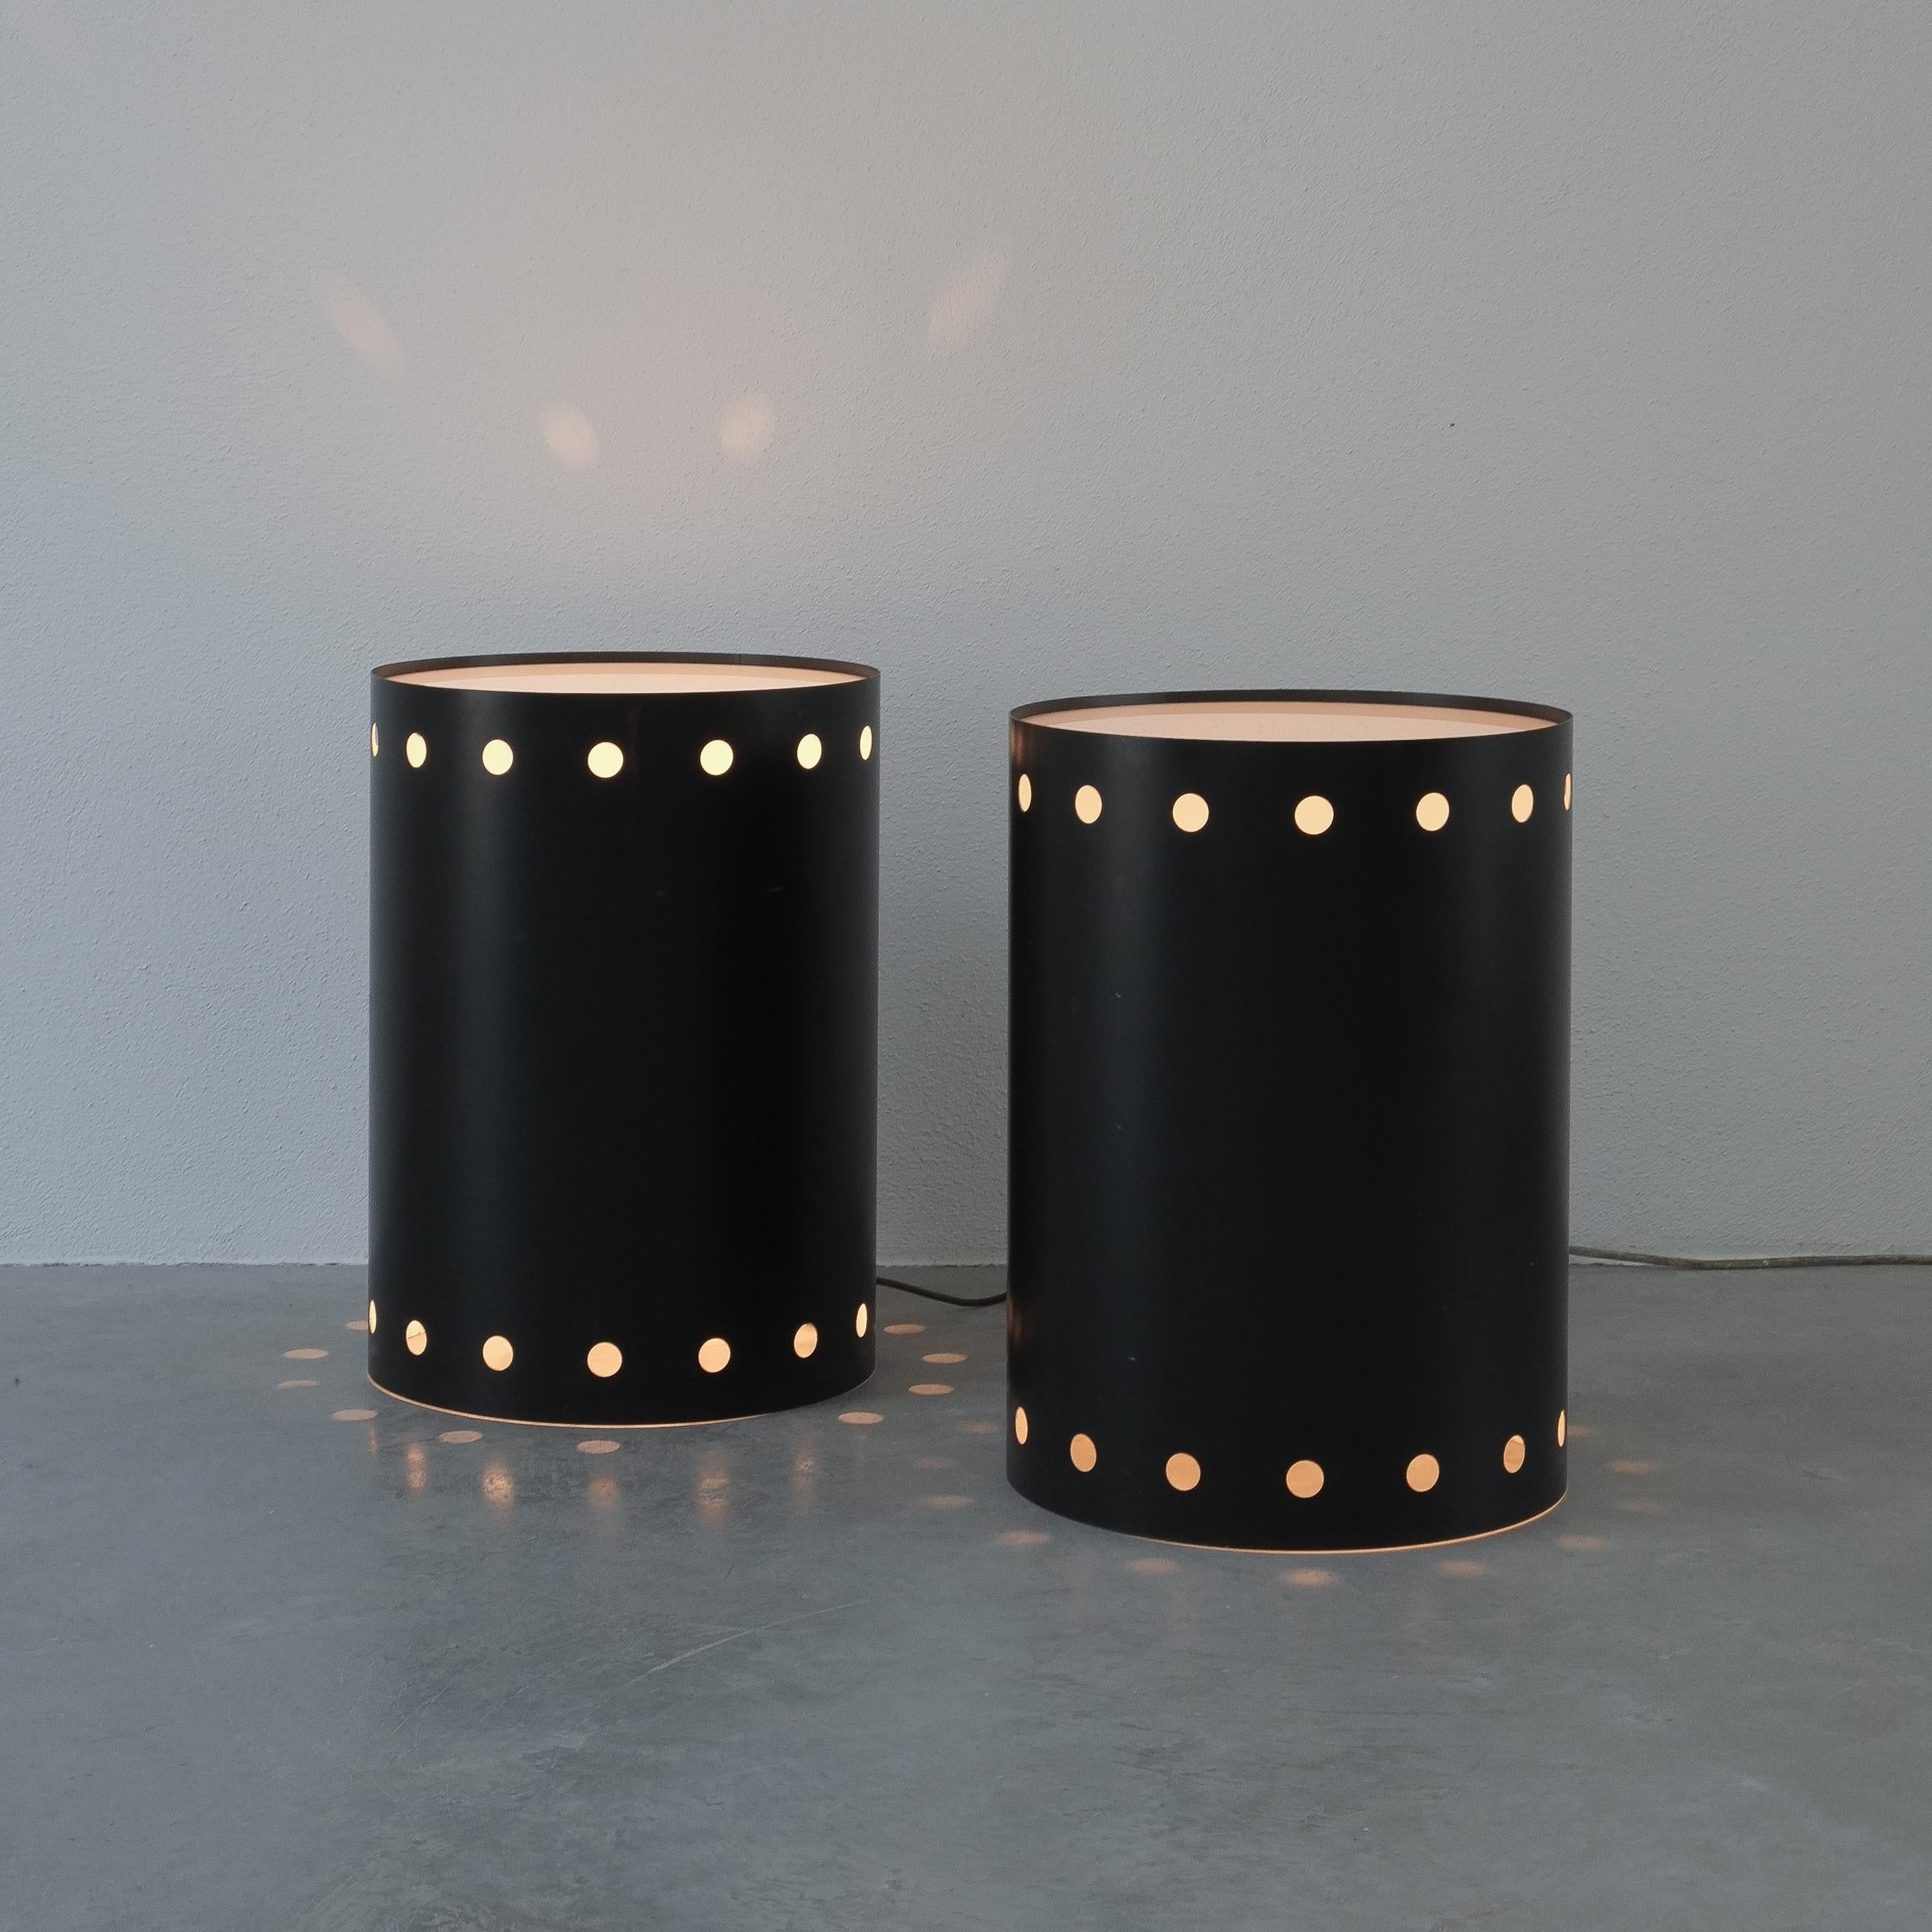 Black bed side tables with lights, Germany circa 1965- sold as a pair

Very rare tubular blackened steel side tables that work with dimmable lamps. Stunning 1960 design made from steel sheet and Lucite. Both work with a large e26/27 bulb up to